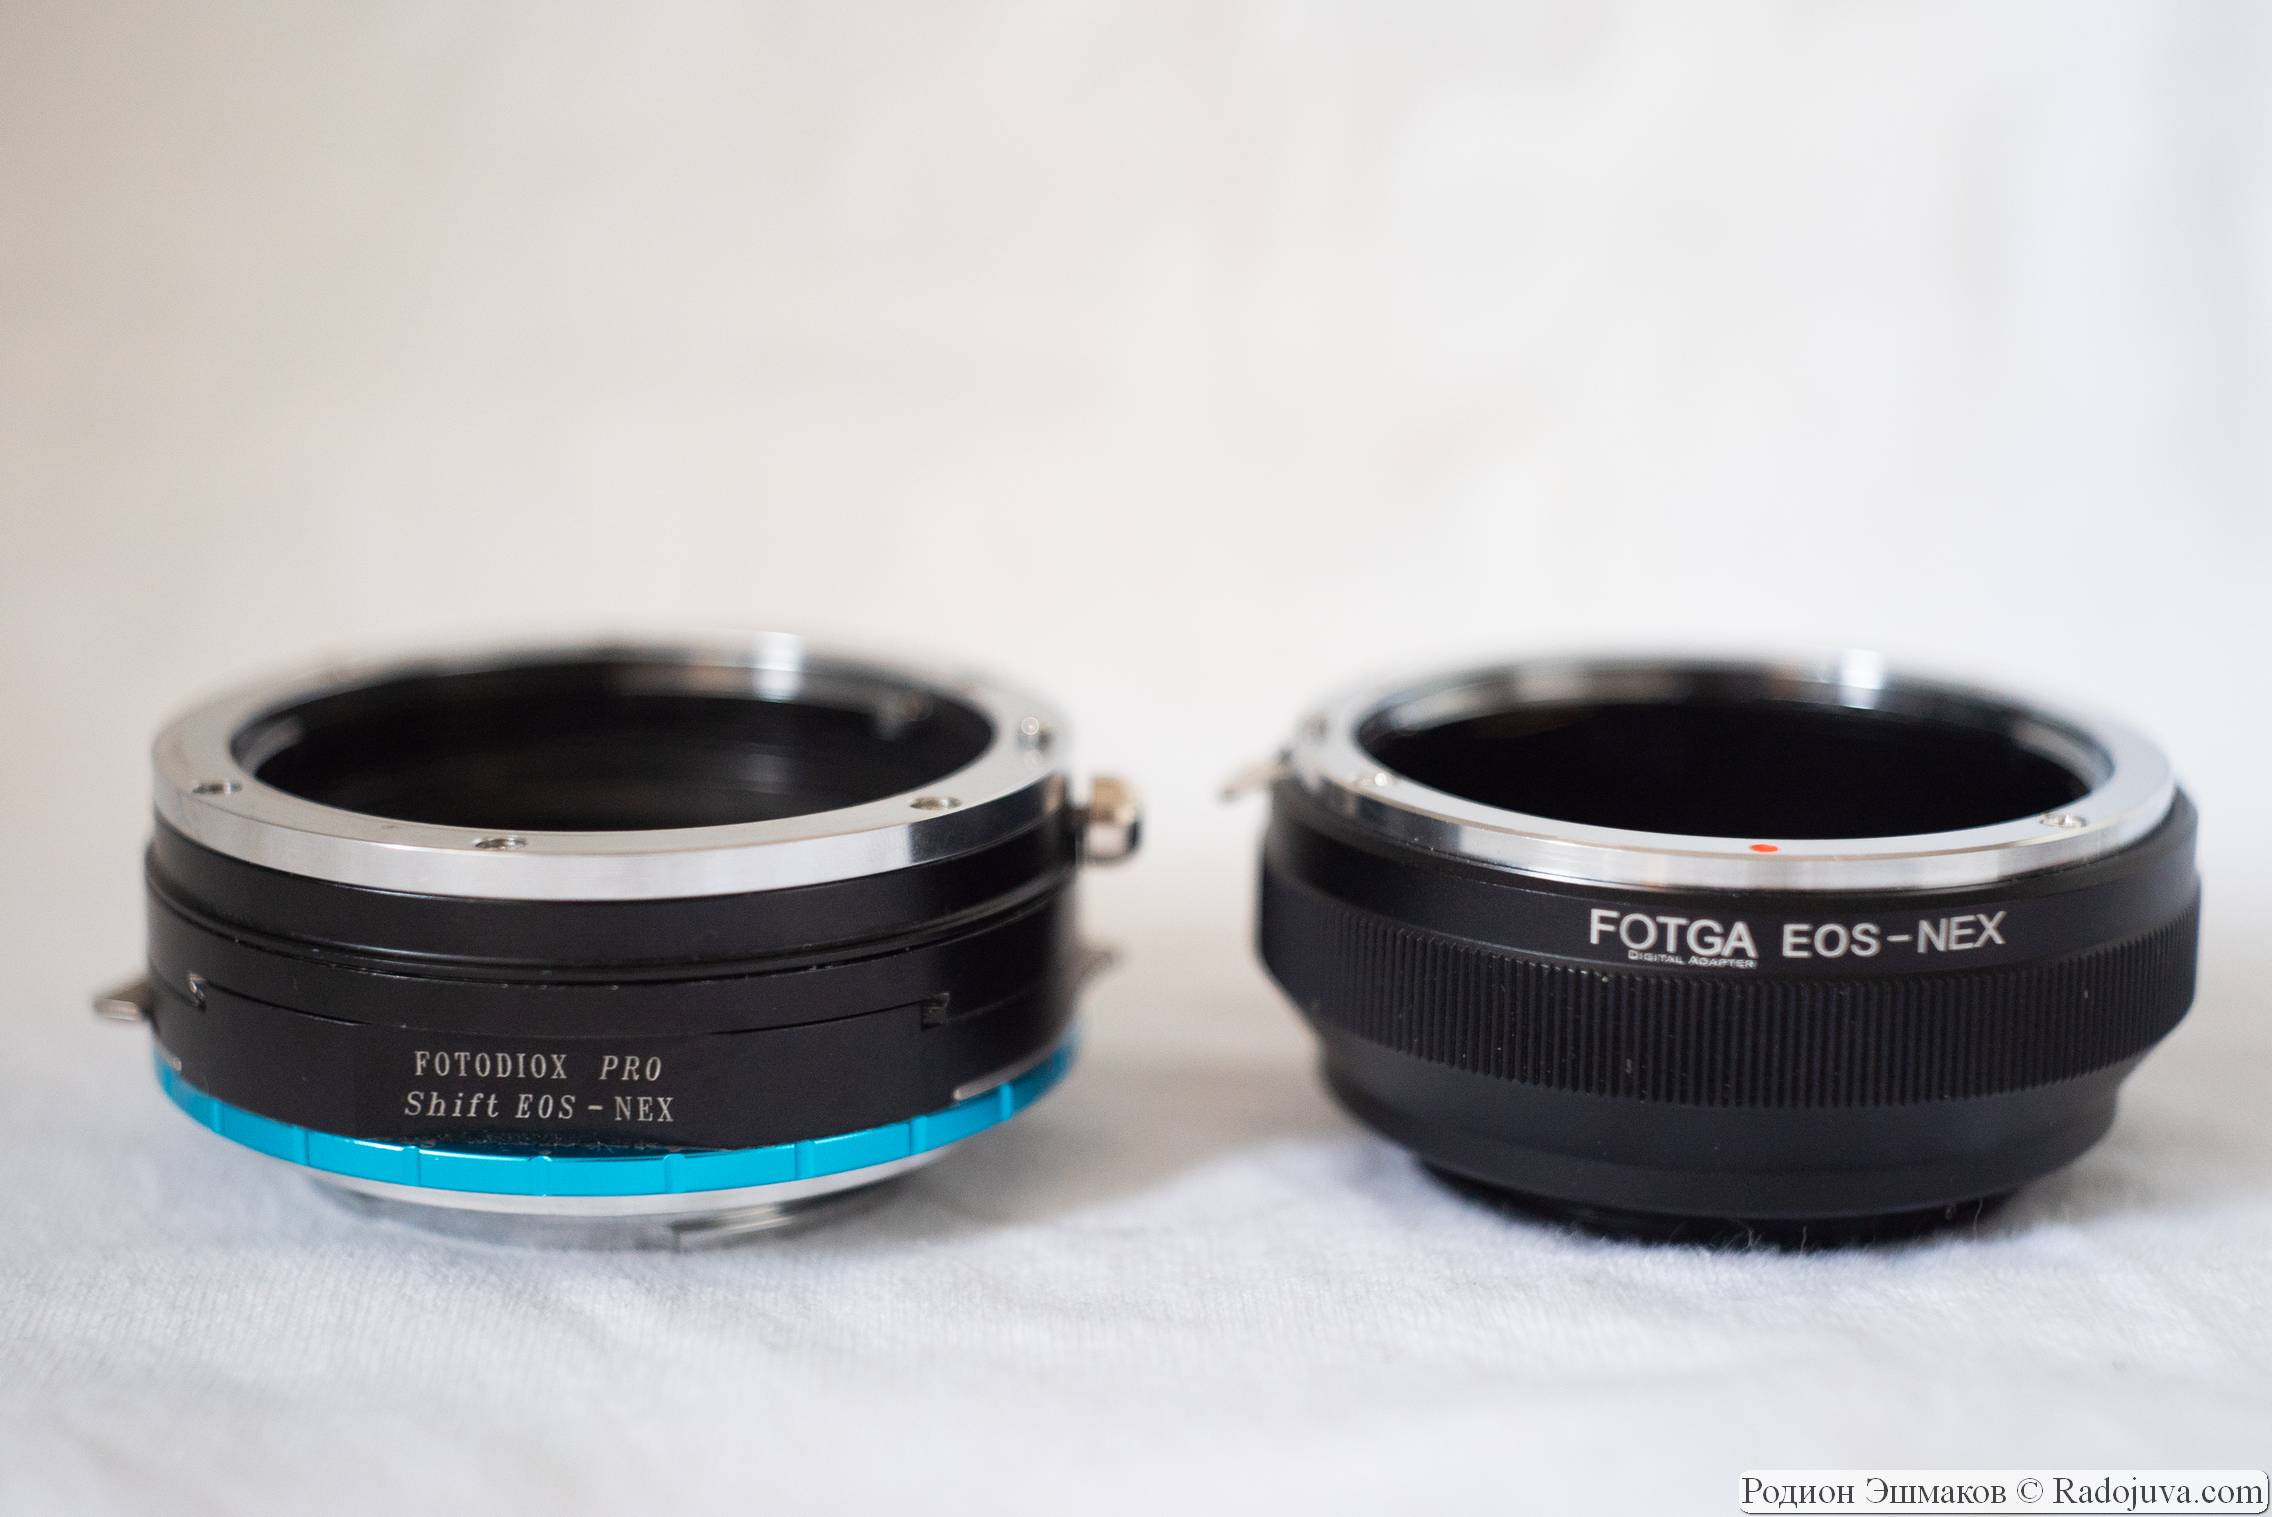 Fotodiox PRO Shift EOS-NEX (left) and a regular inexpensive EOS-NEX adapter.